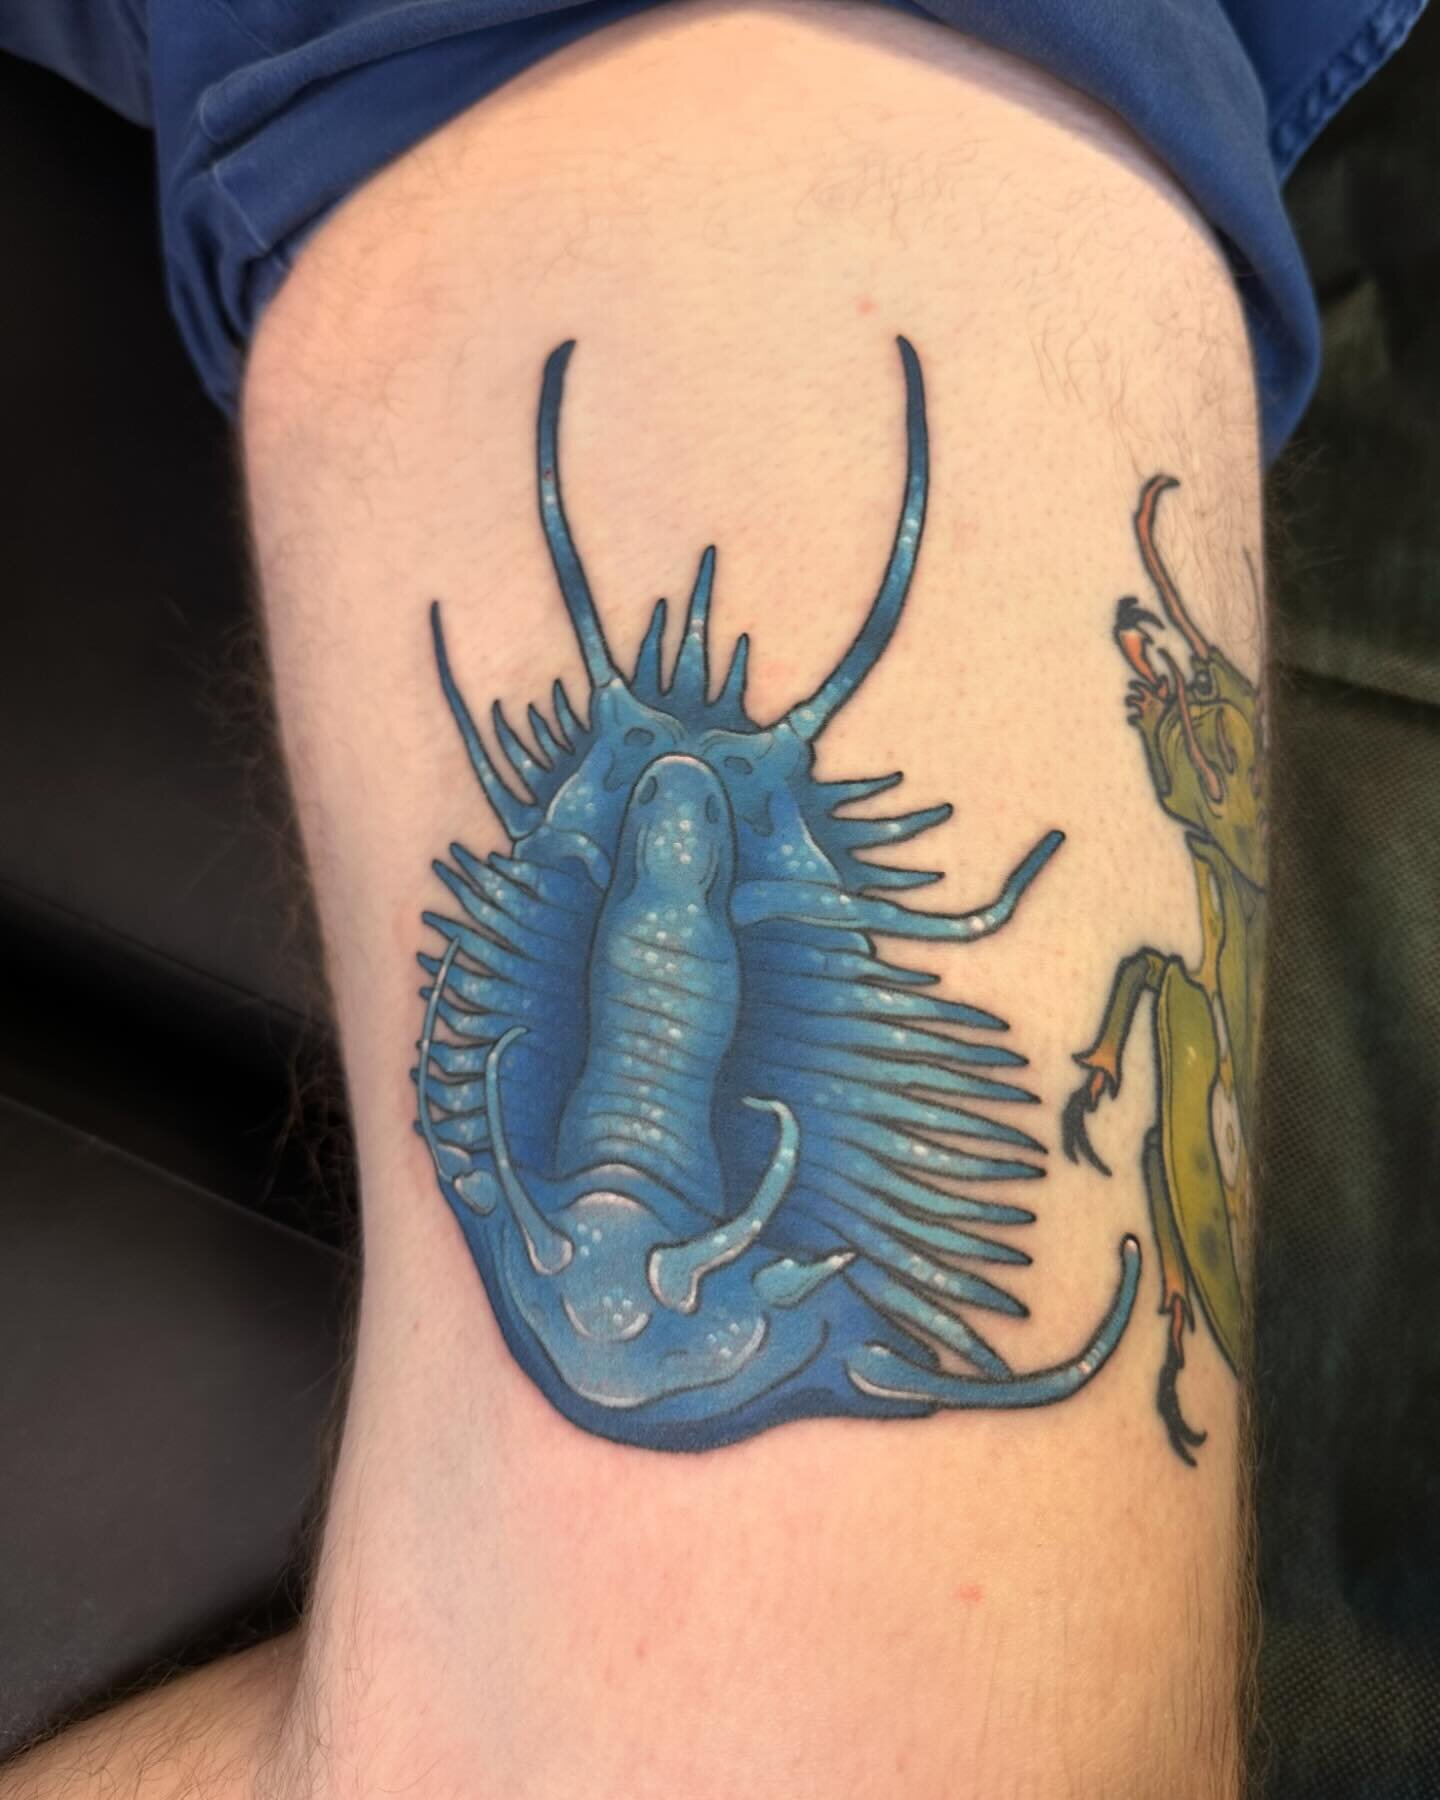 Big ole trilobite on the tender inner thigh for the coolest Chris✨ (w/ a shot of the one he gifted me at the end👌)
Thanks for collecting cool critters from me! Can&rsquo;t wait to add the scorpion next🦂🩸
.
.
.
#Tattoo #ladytattooers #ohiotattooers